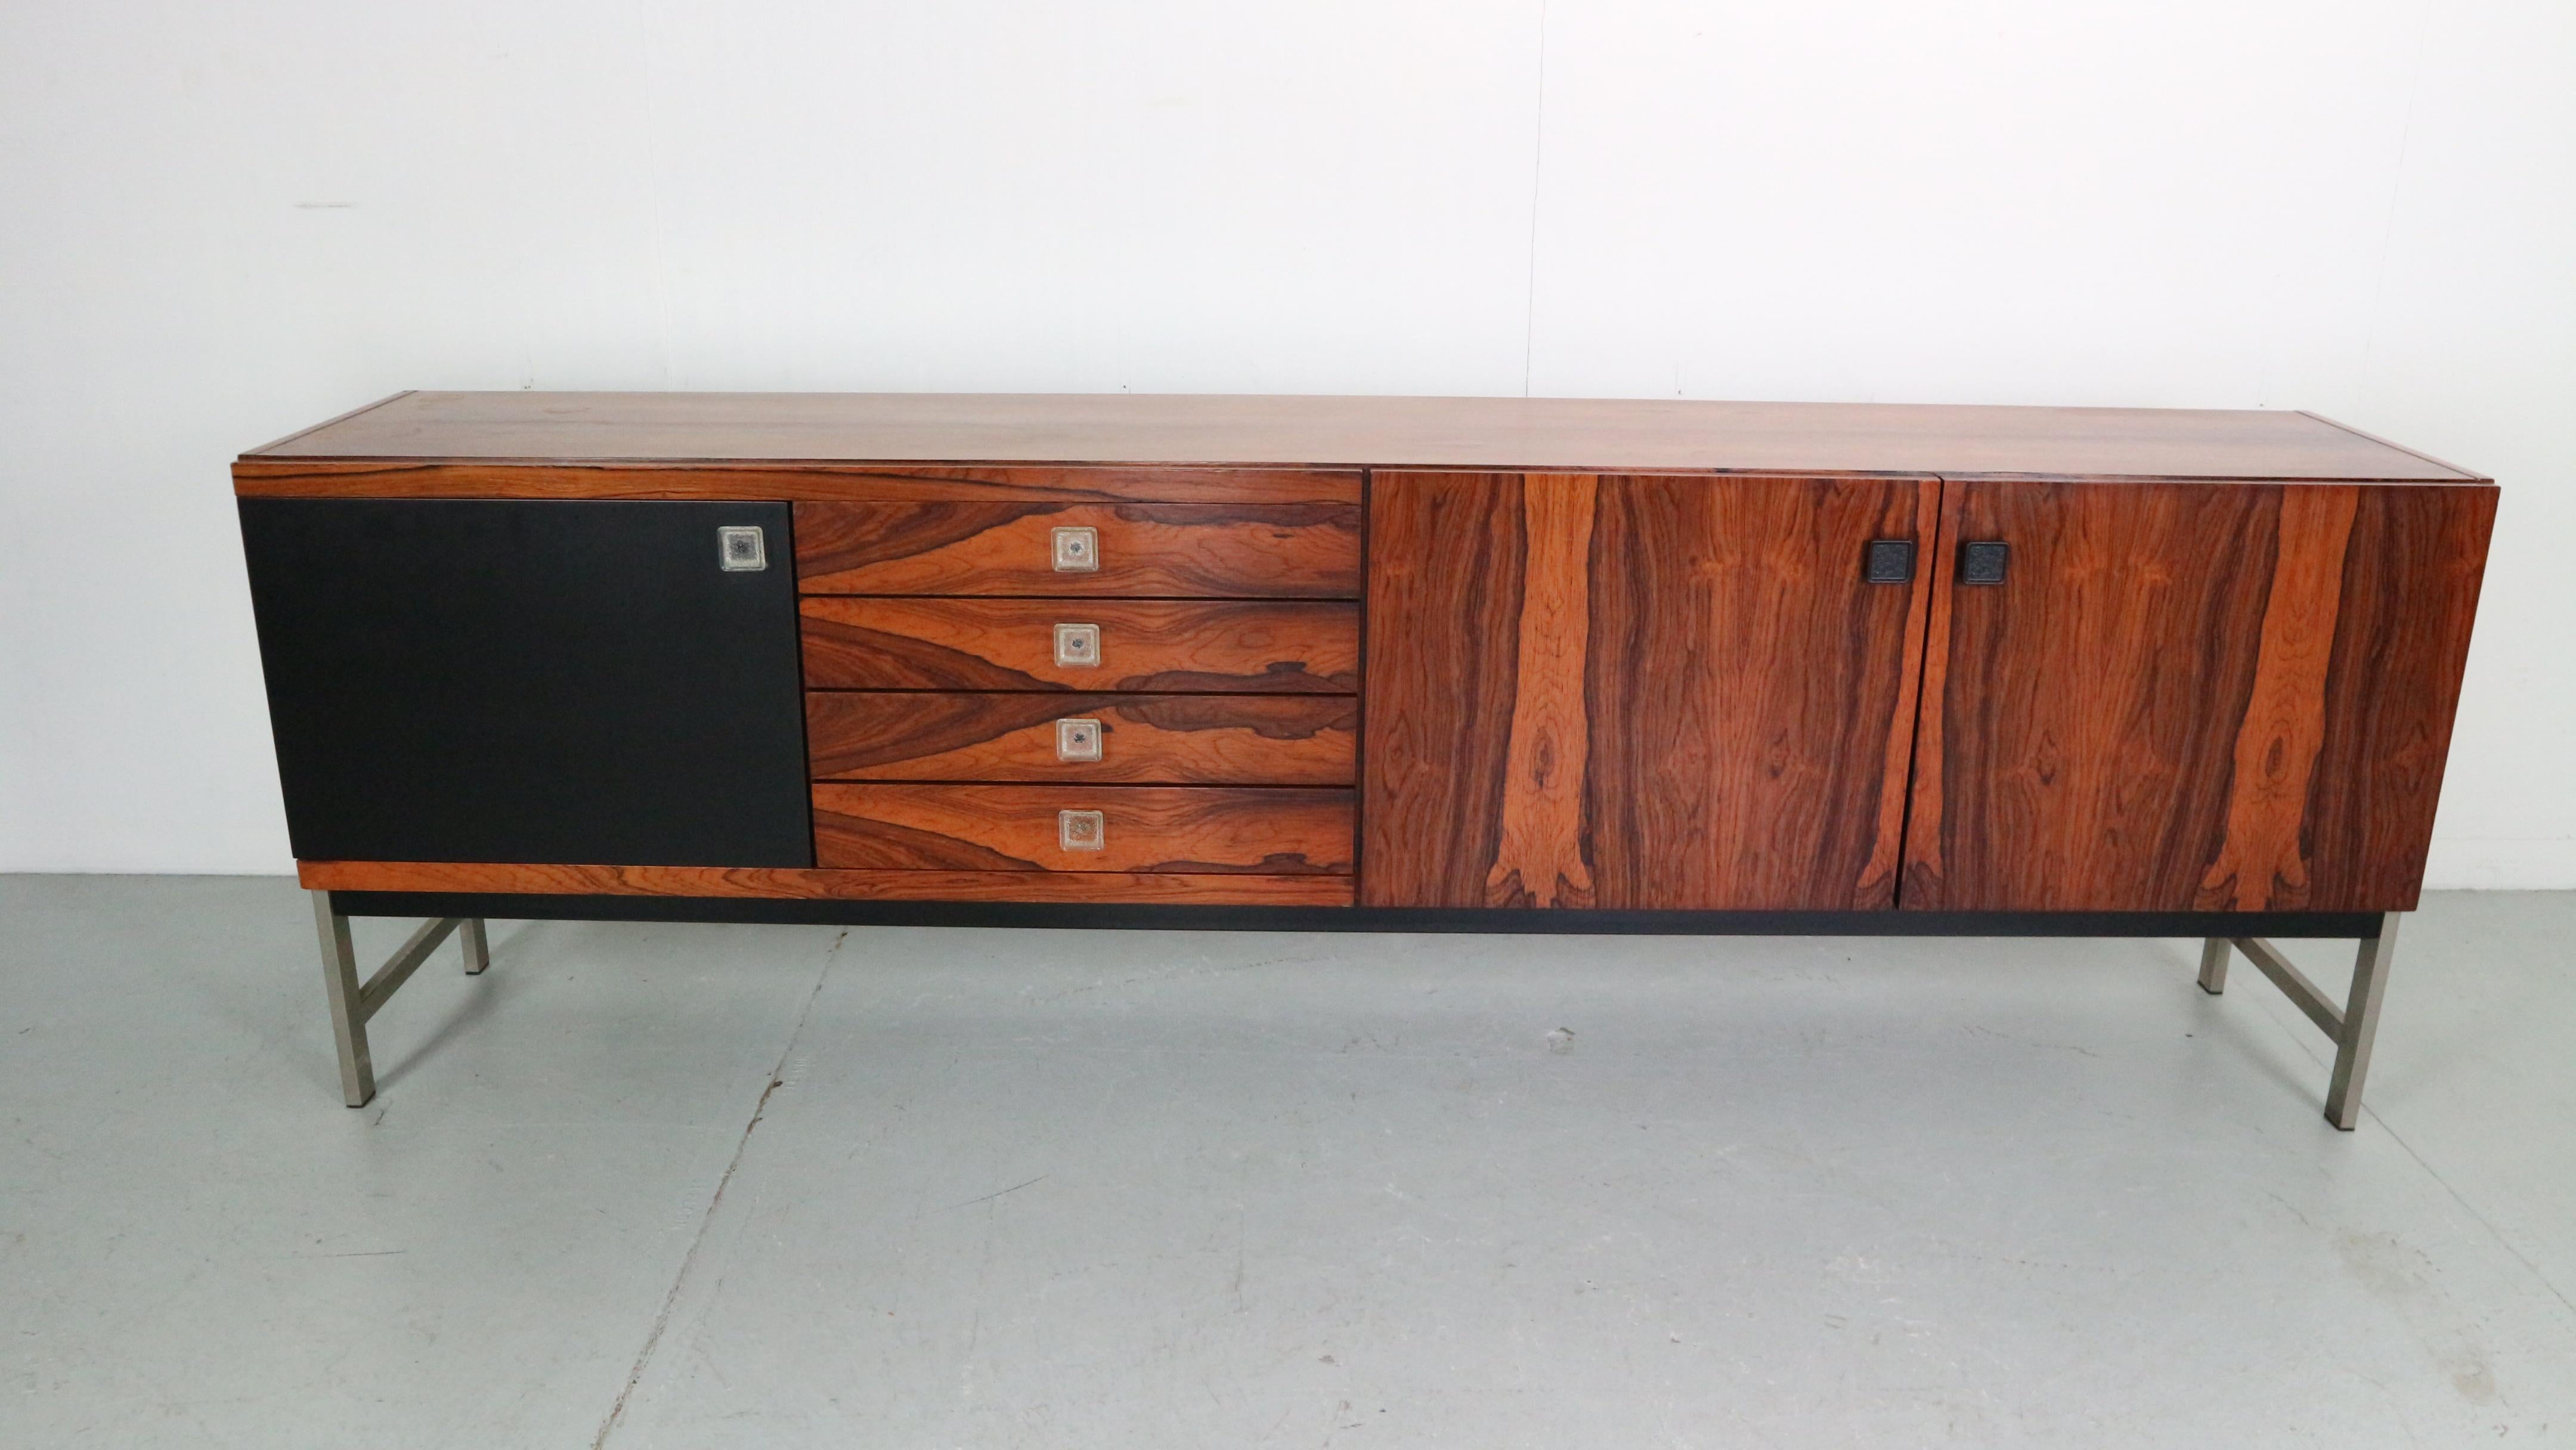 Beautiful Mid-Century Modern sideboard/credenza manufactured by Fristho famous Dutch furniture manufacture.
1960s period, the Netherlands.
Made of brazilian rosewood.
Beautiful wooden patina.

This stunning rosewood sideboard with a chrome plated